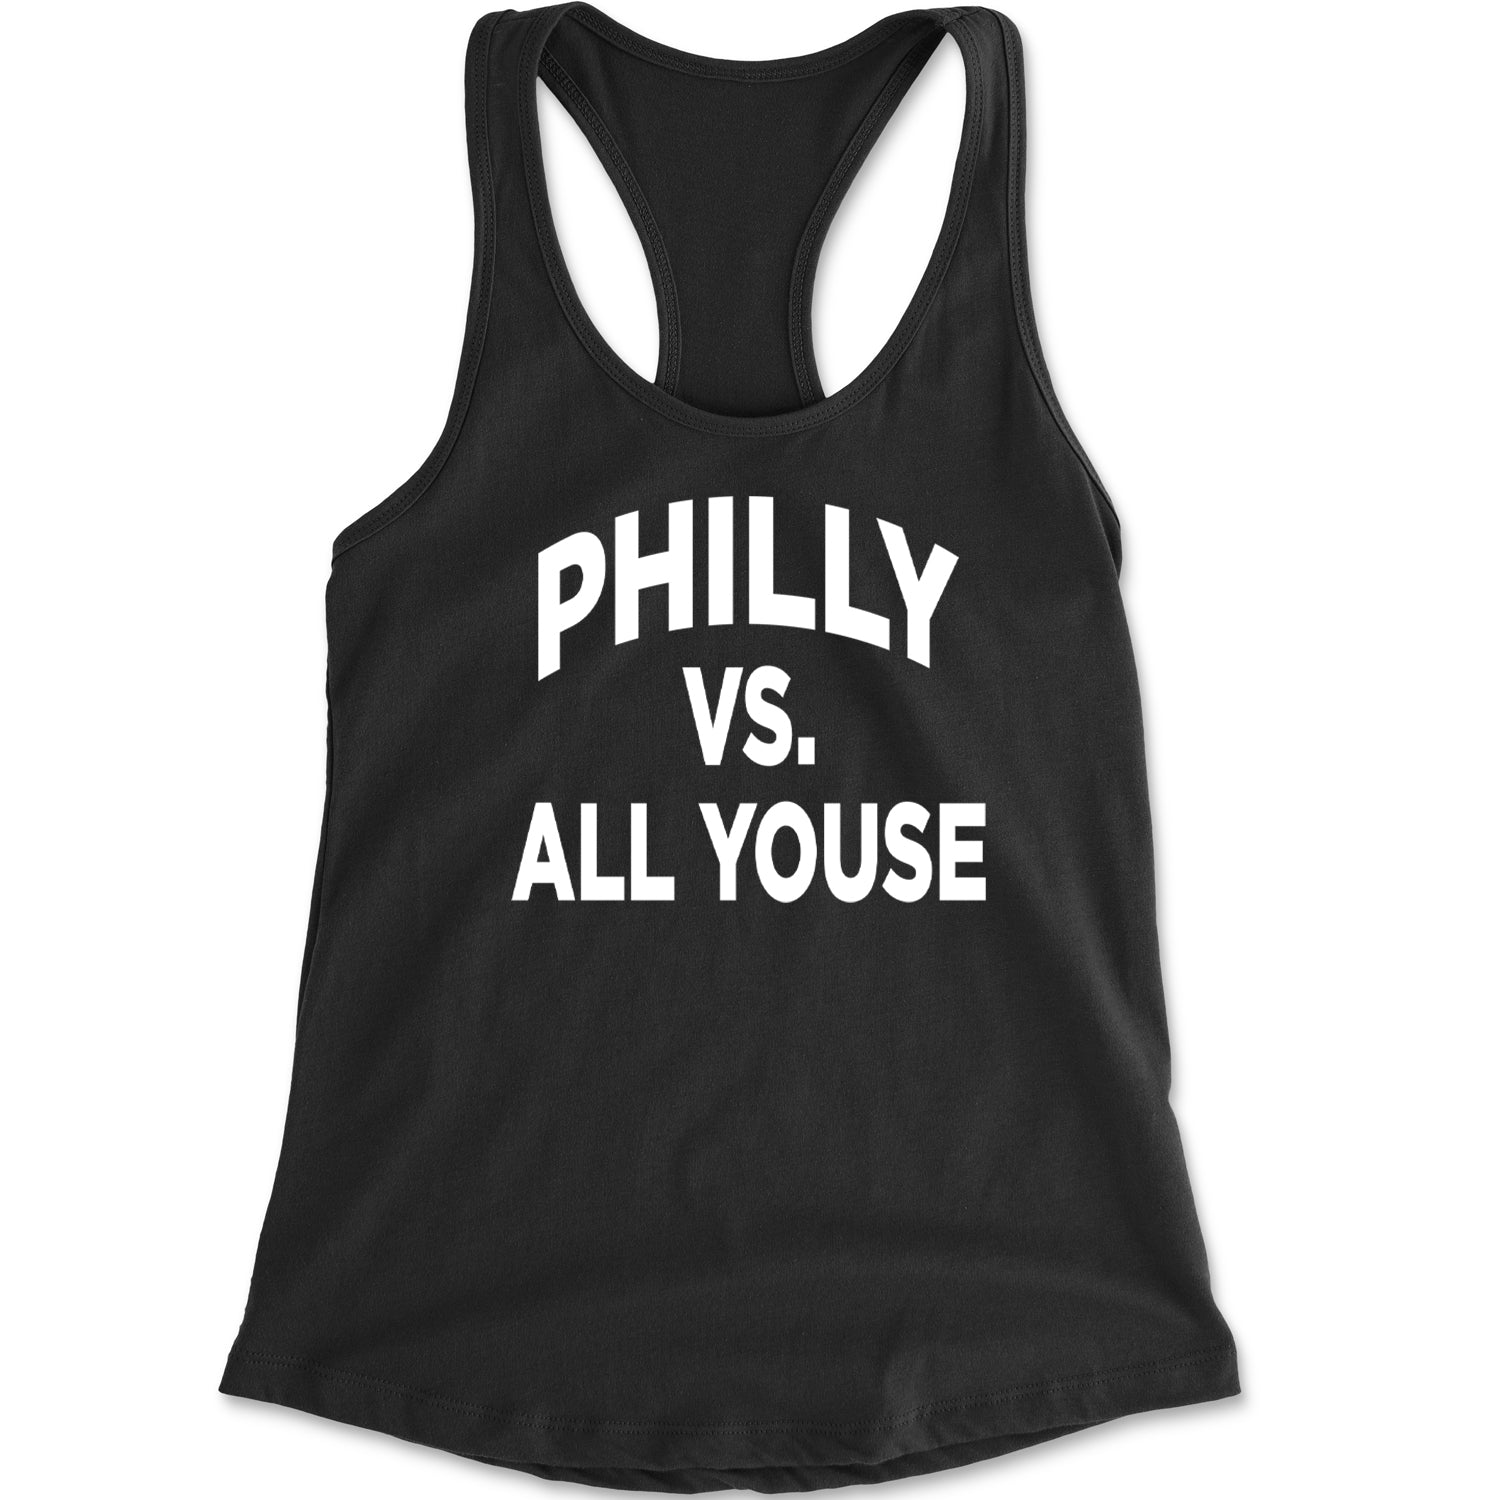 Philly Vs. All Youse Philly Thing Racerback Tank Top for Women